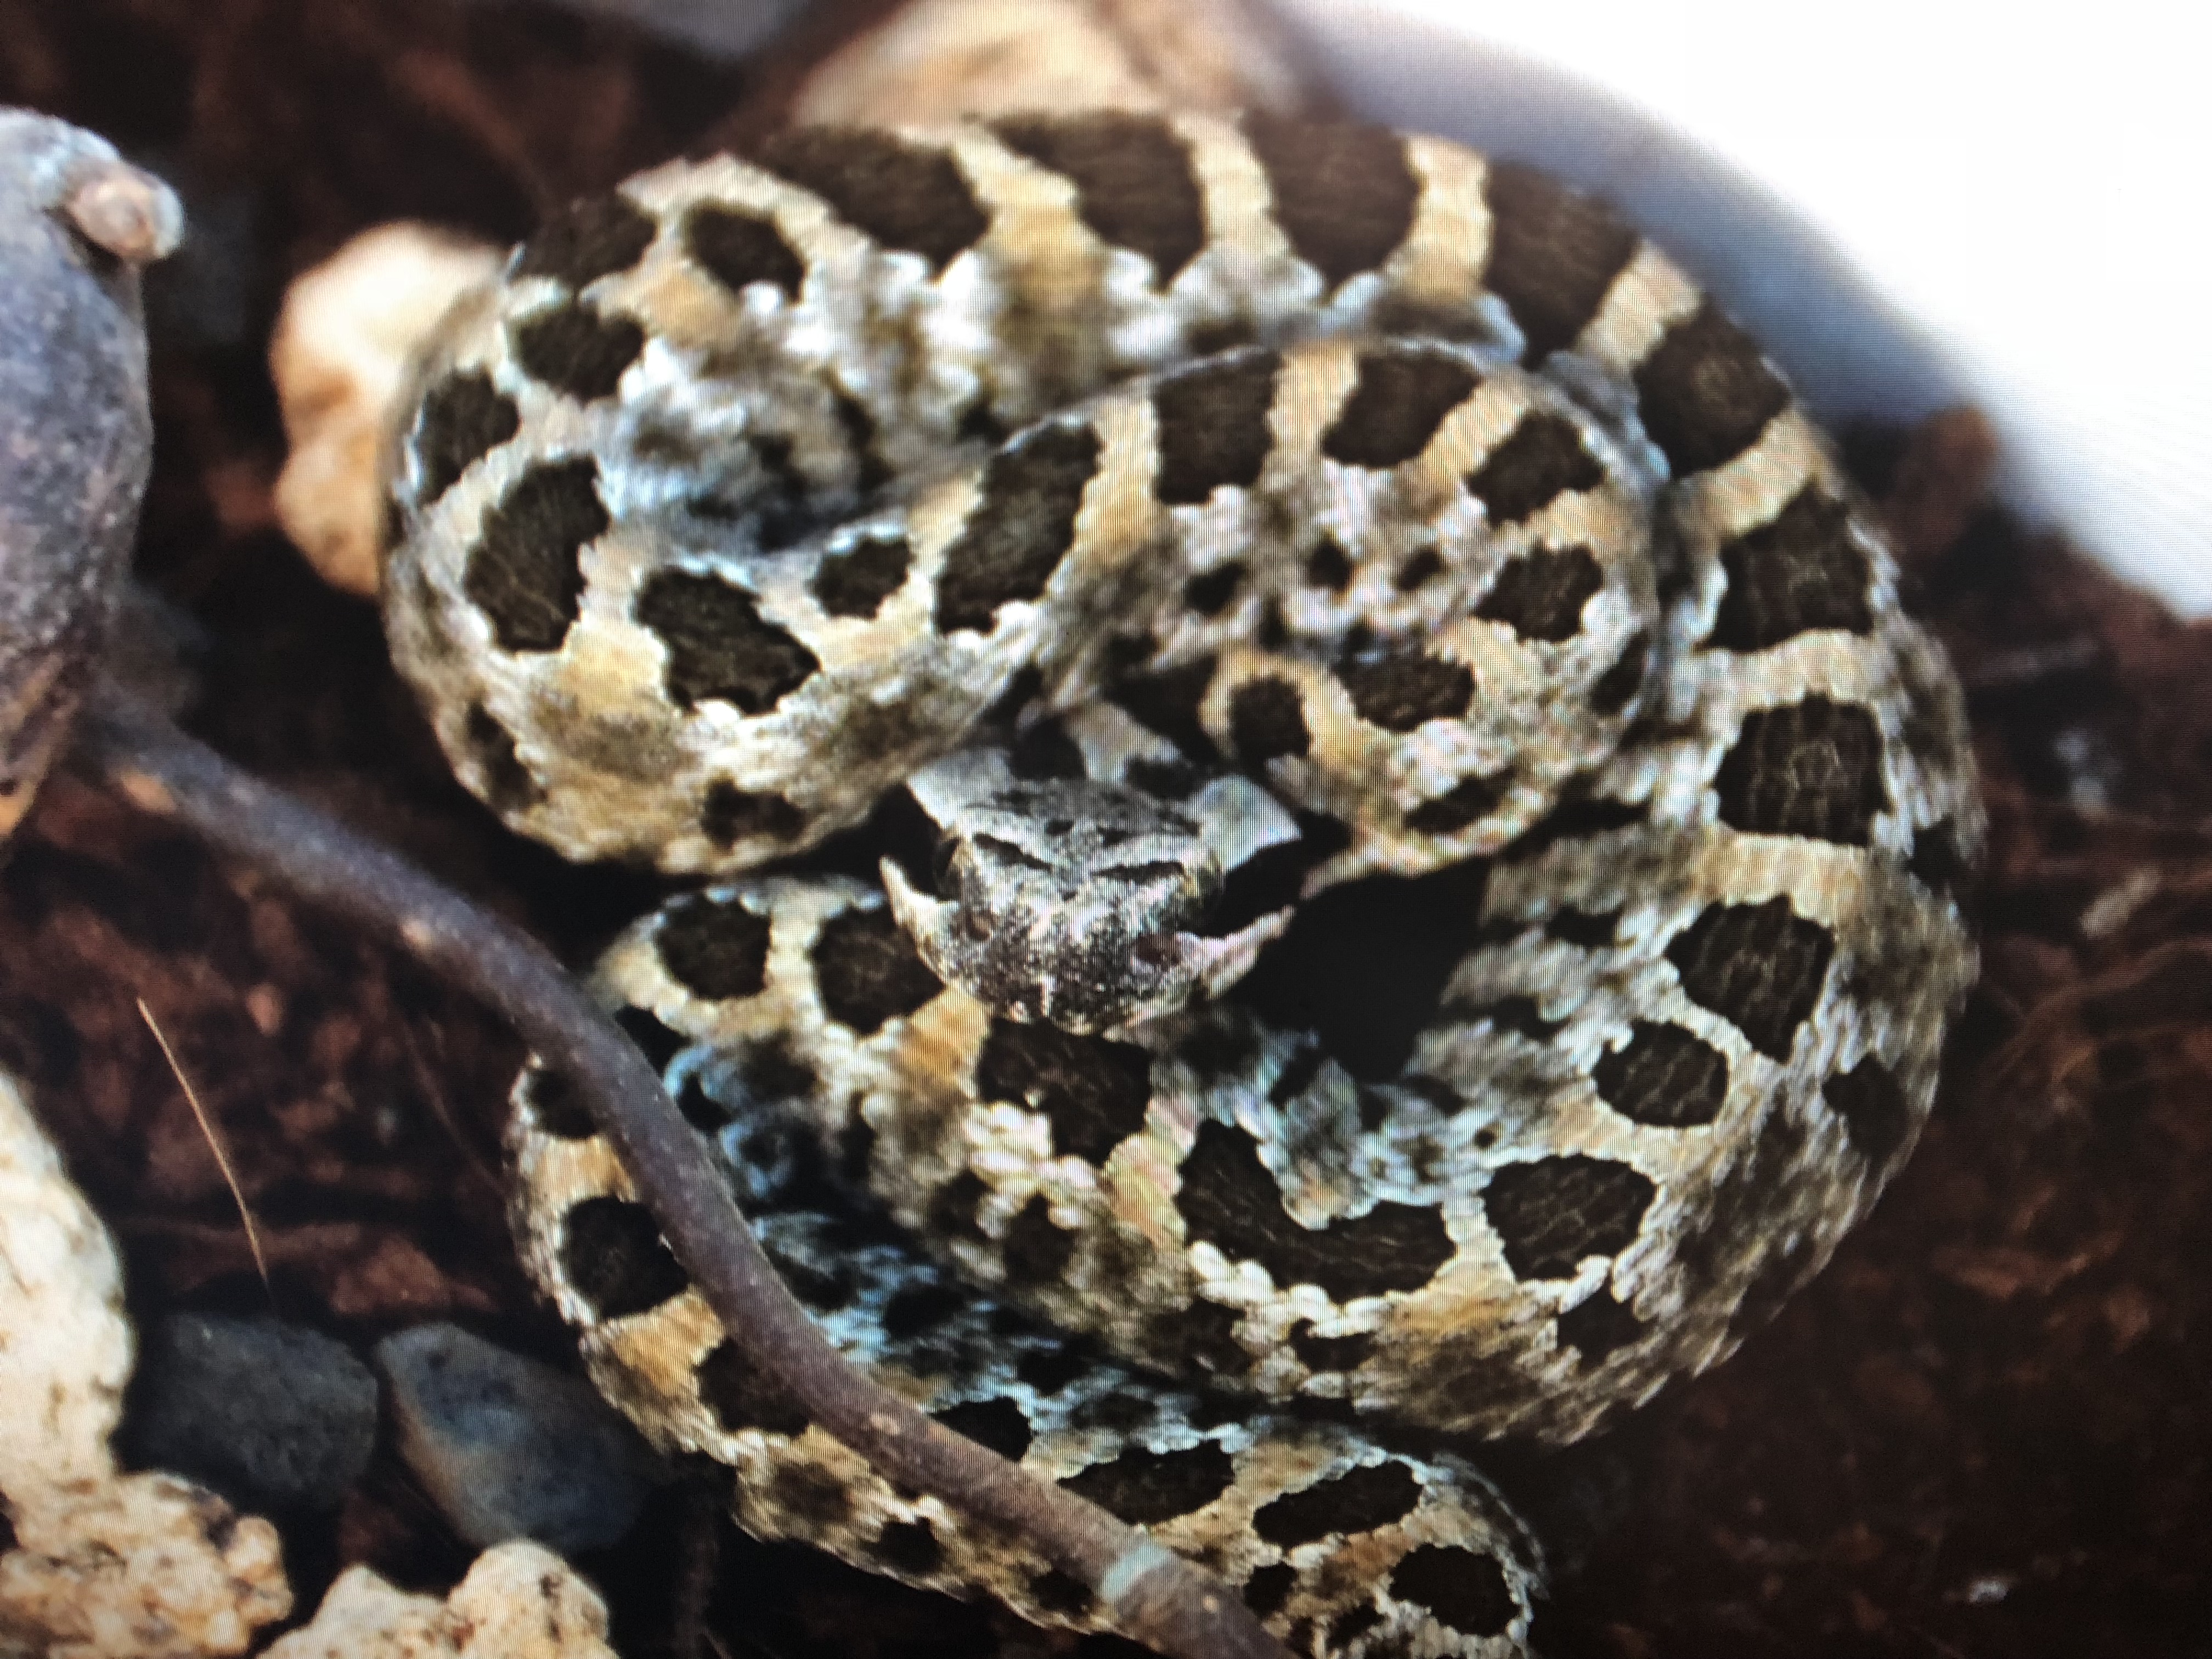 Snake-Breeder - Serpents: Crotalus armstrongi